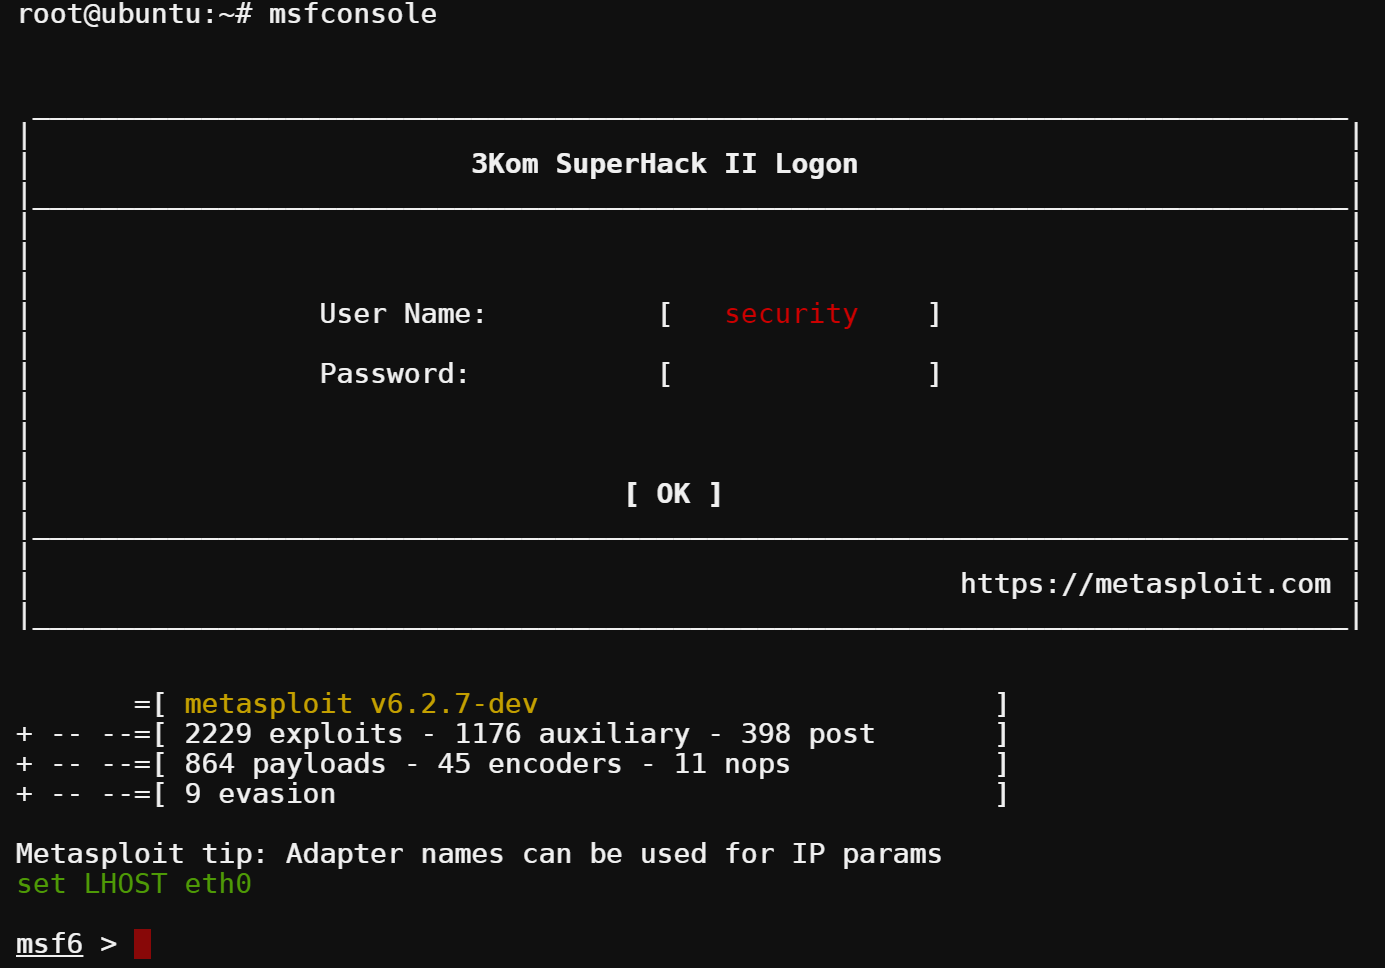 Accessing the Metasploit console